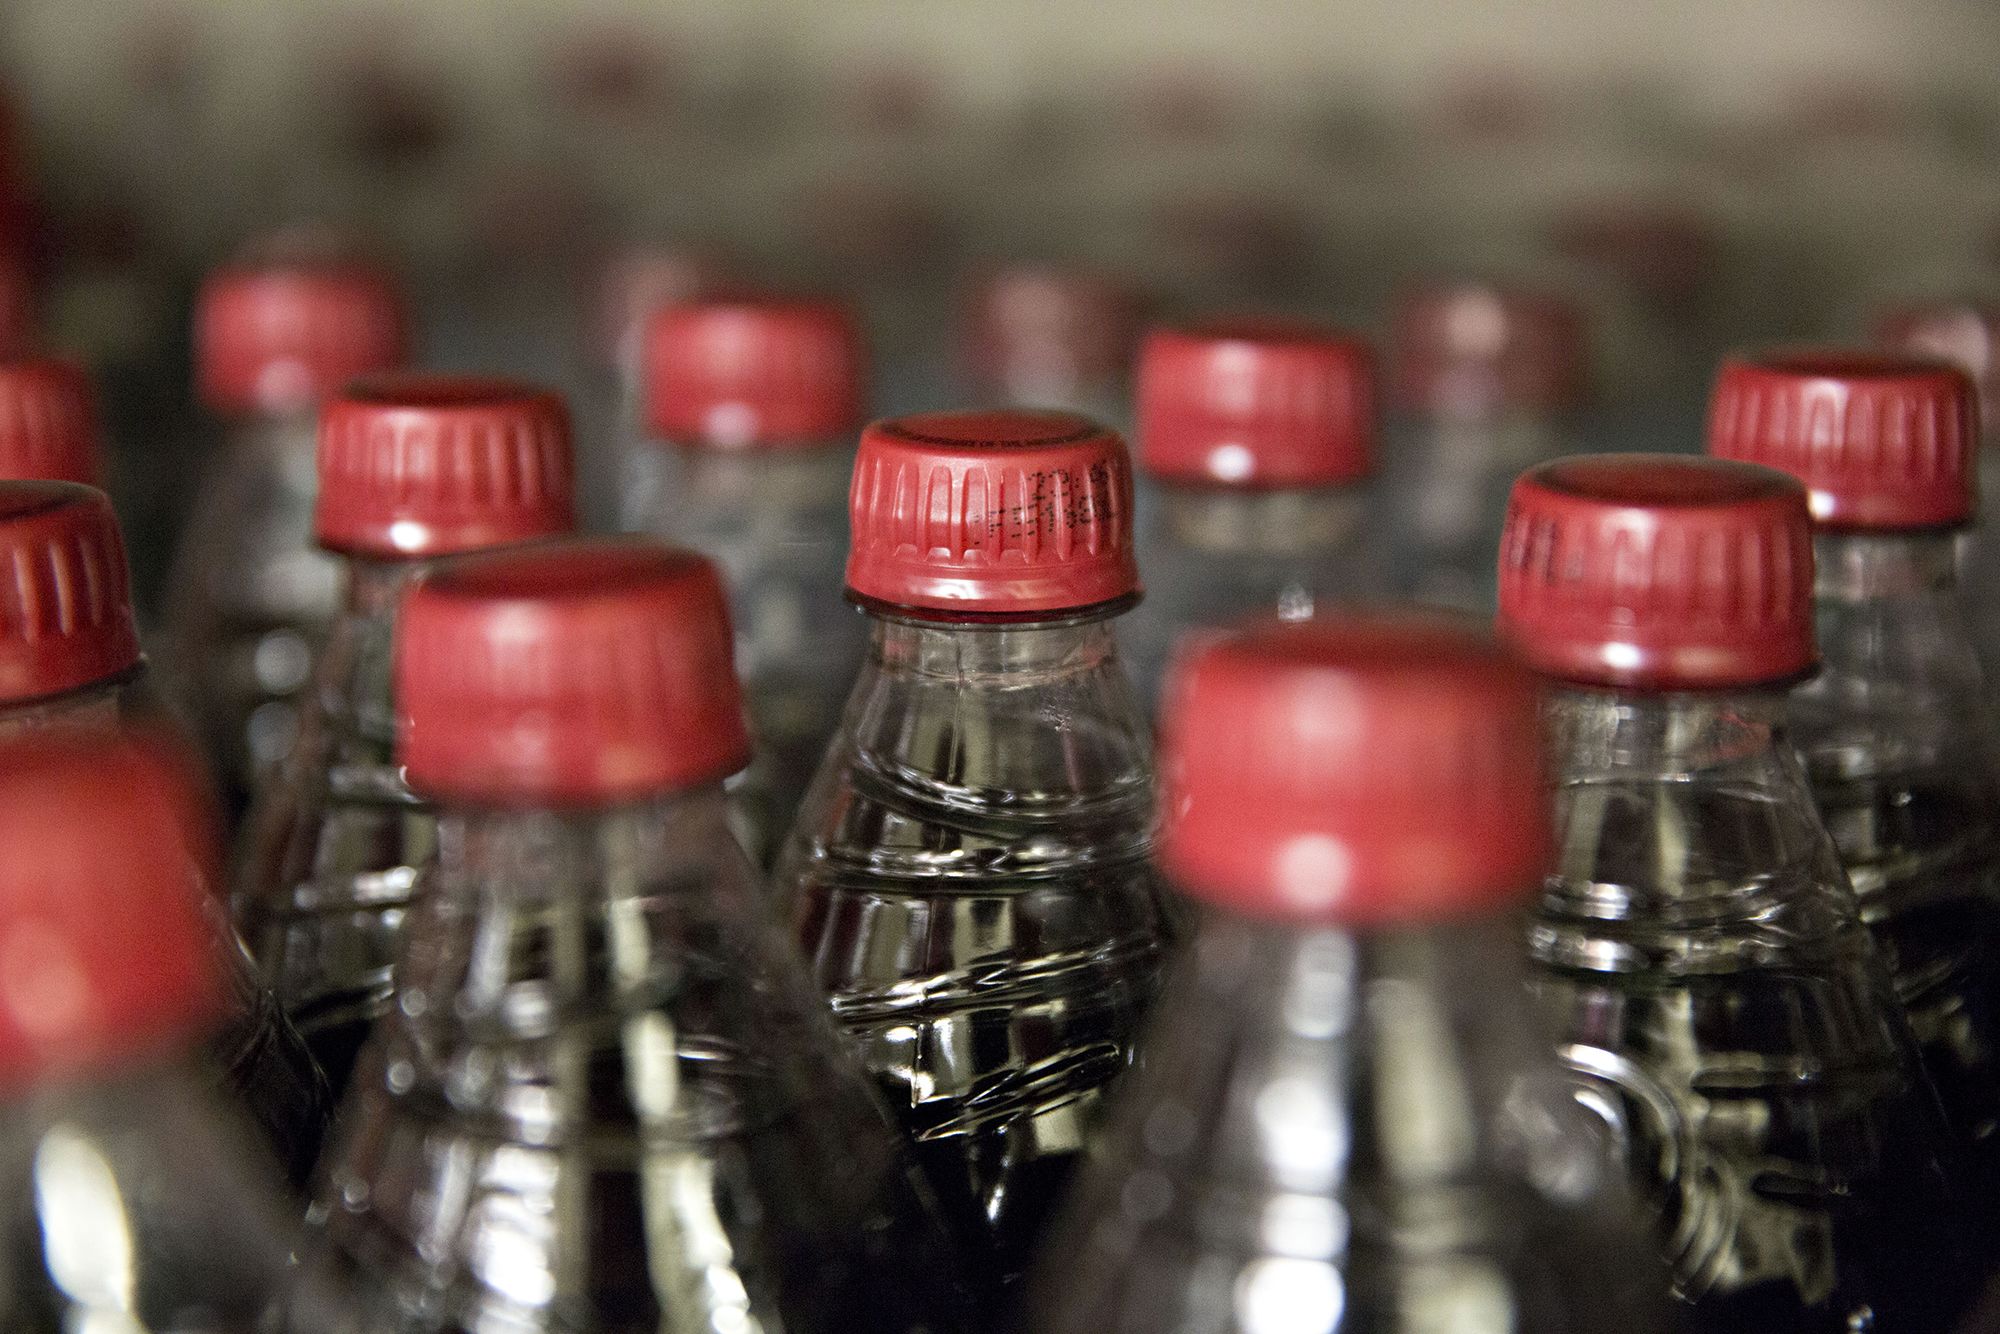 Big drink ban: Americans drink MORE soda when forced to buy smaller cups,  claim researchers